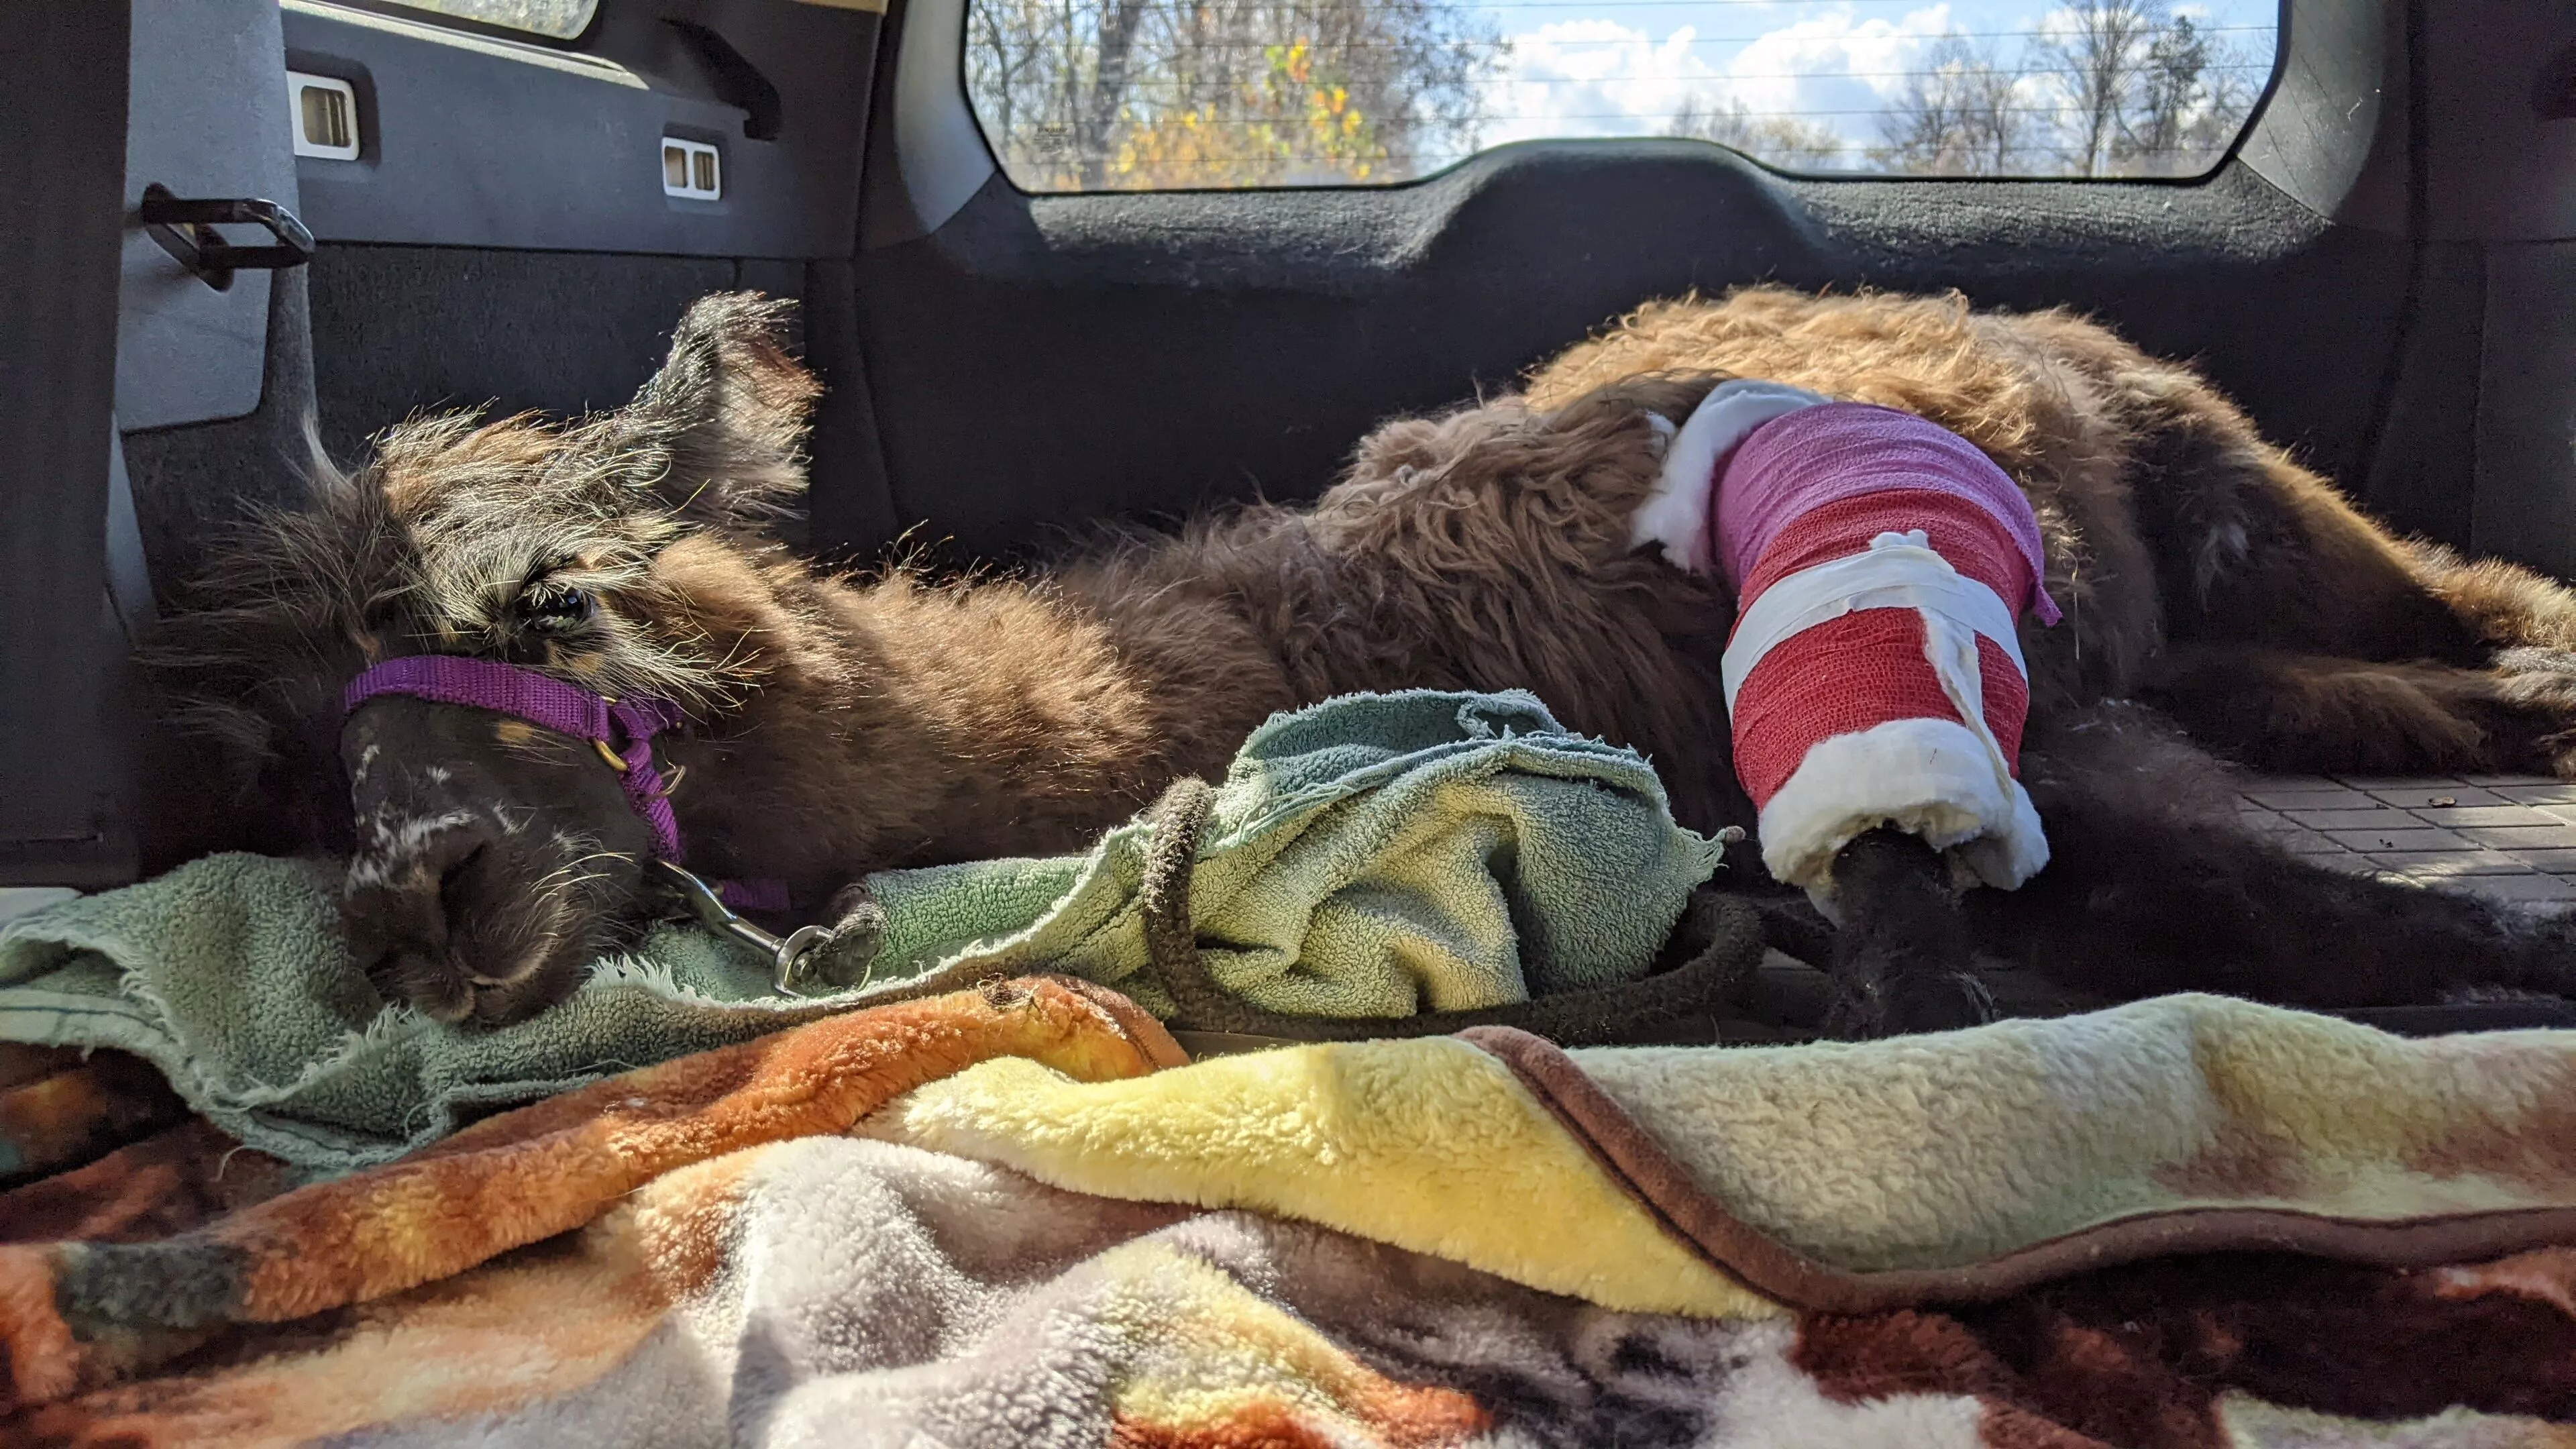 An image of Florian with a bandaged leg being transported in the back of a vehicle.